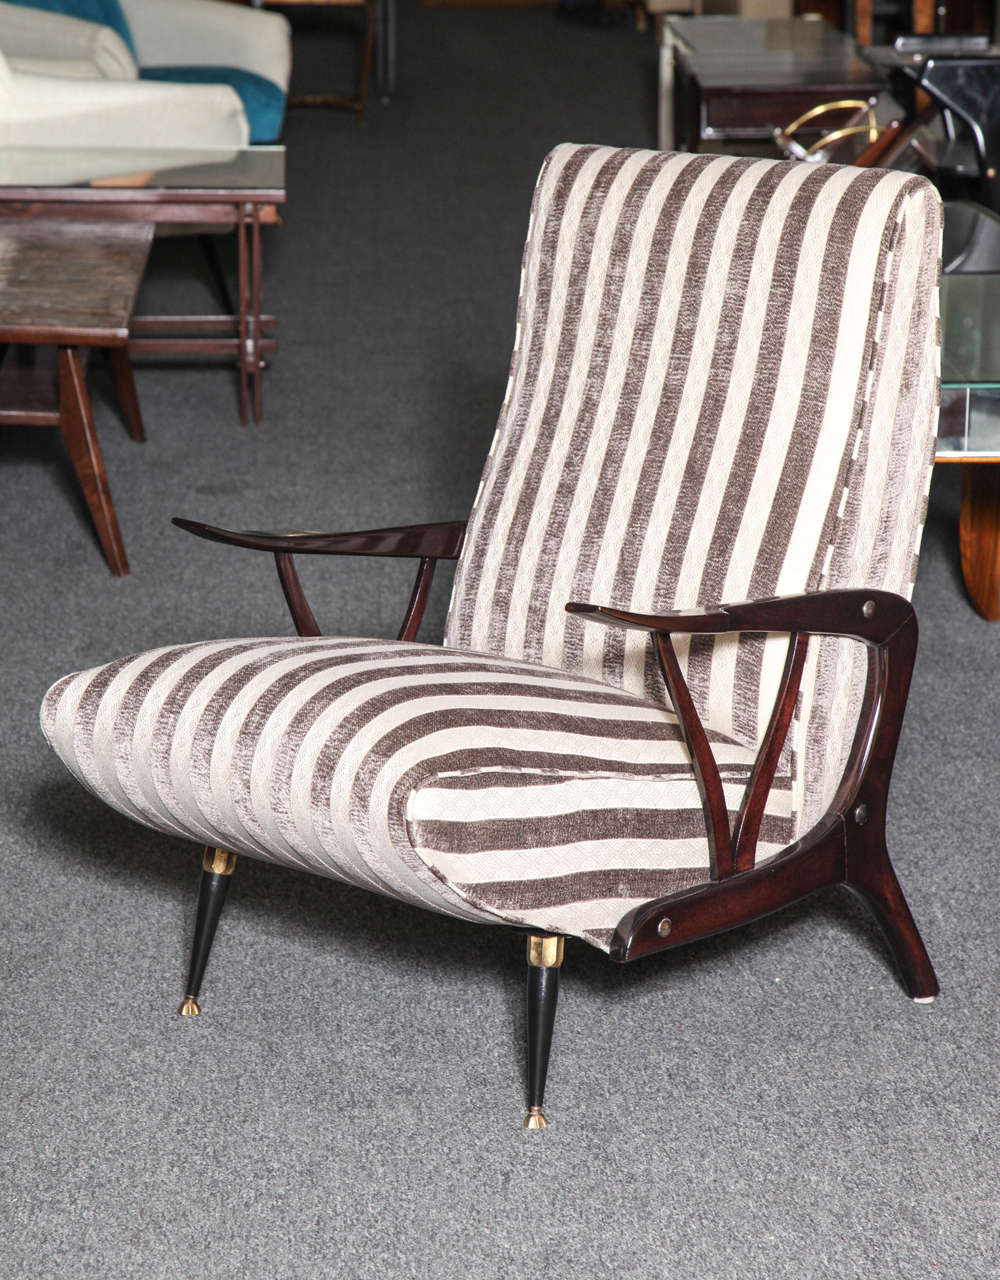 Stylish pair of armchairs made in Milan 1955, wonderfully carved biomorphic wood arms and back legs front, legs in steel with brass sabots, very unusual design, very comfortable.